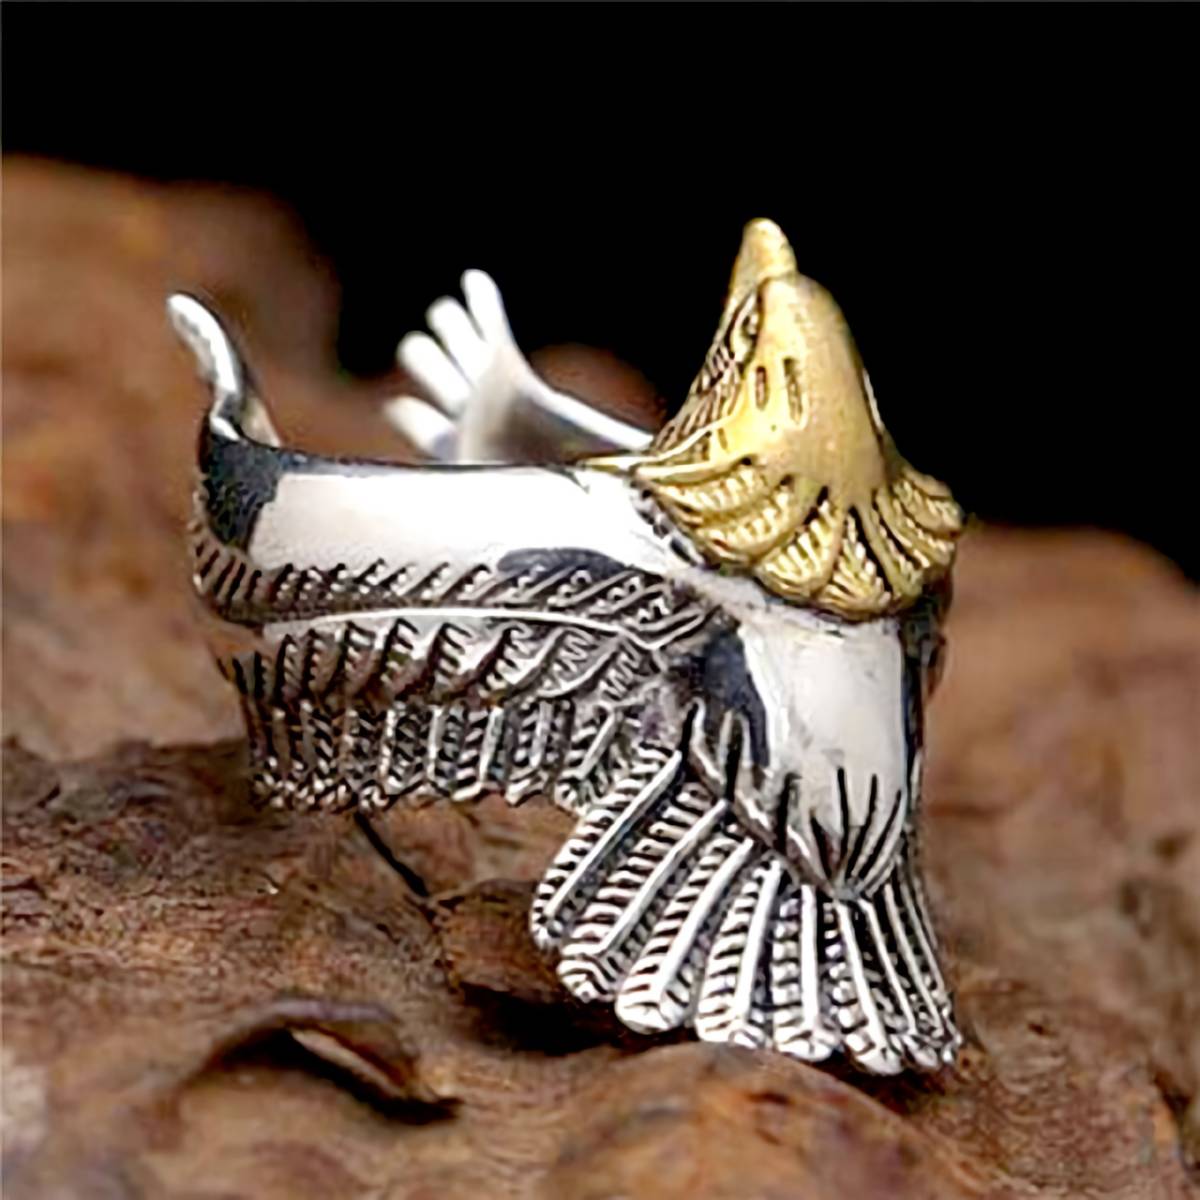  new goods 1 jpy ~* free shipping * free size gold paint Falcon yellow gold. hawk platinum finish 925 silver ring birthday present travel summer festival consecutive holidays gift domestic sending 